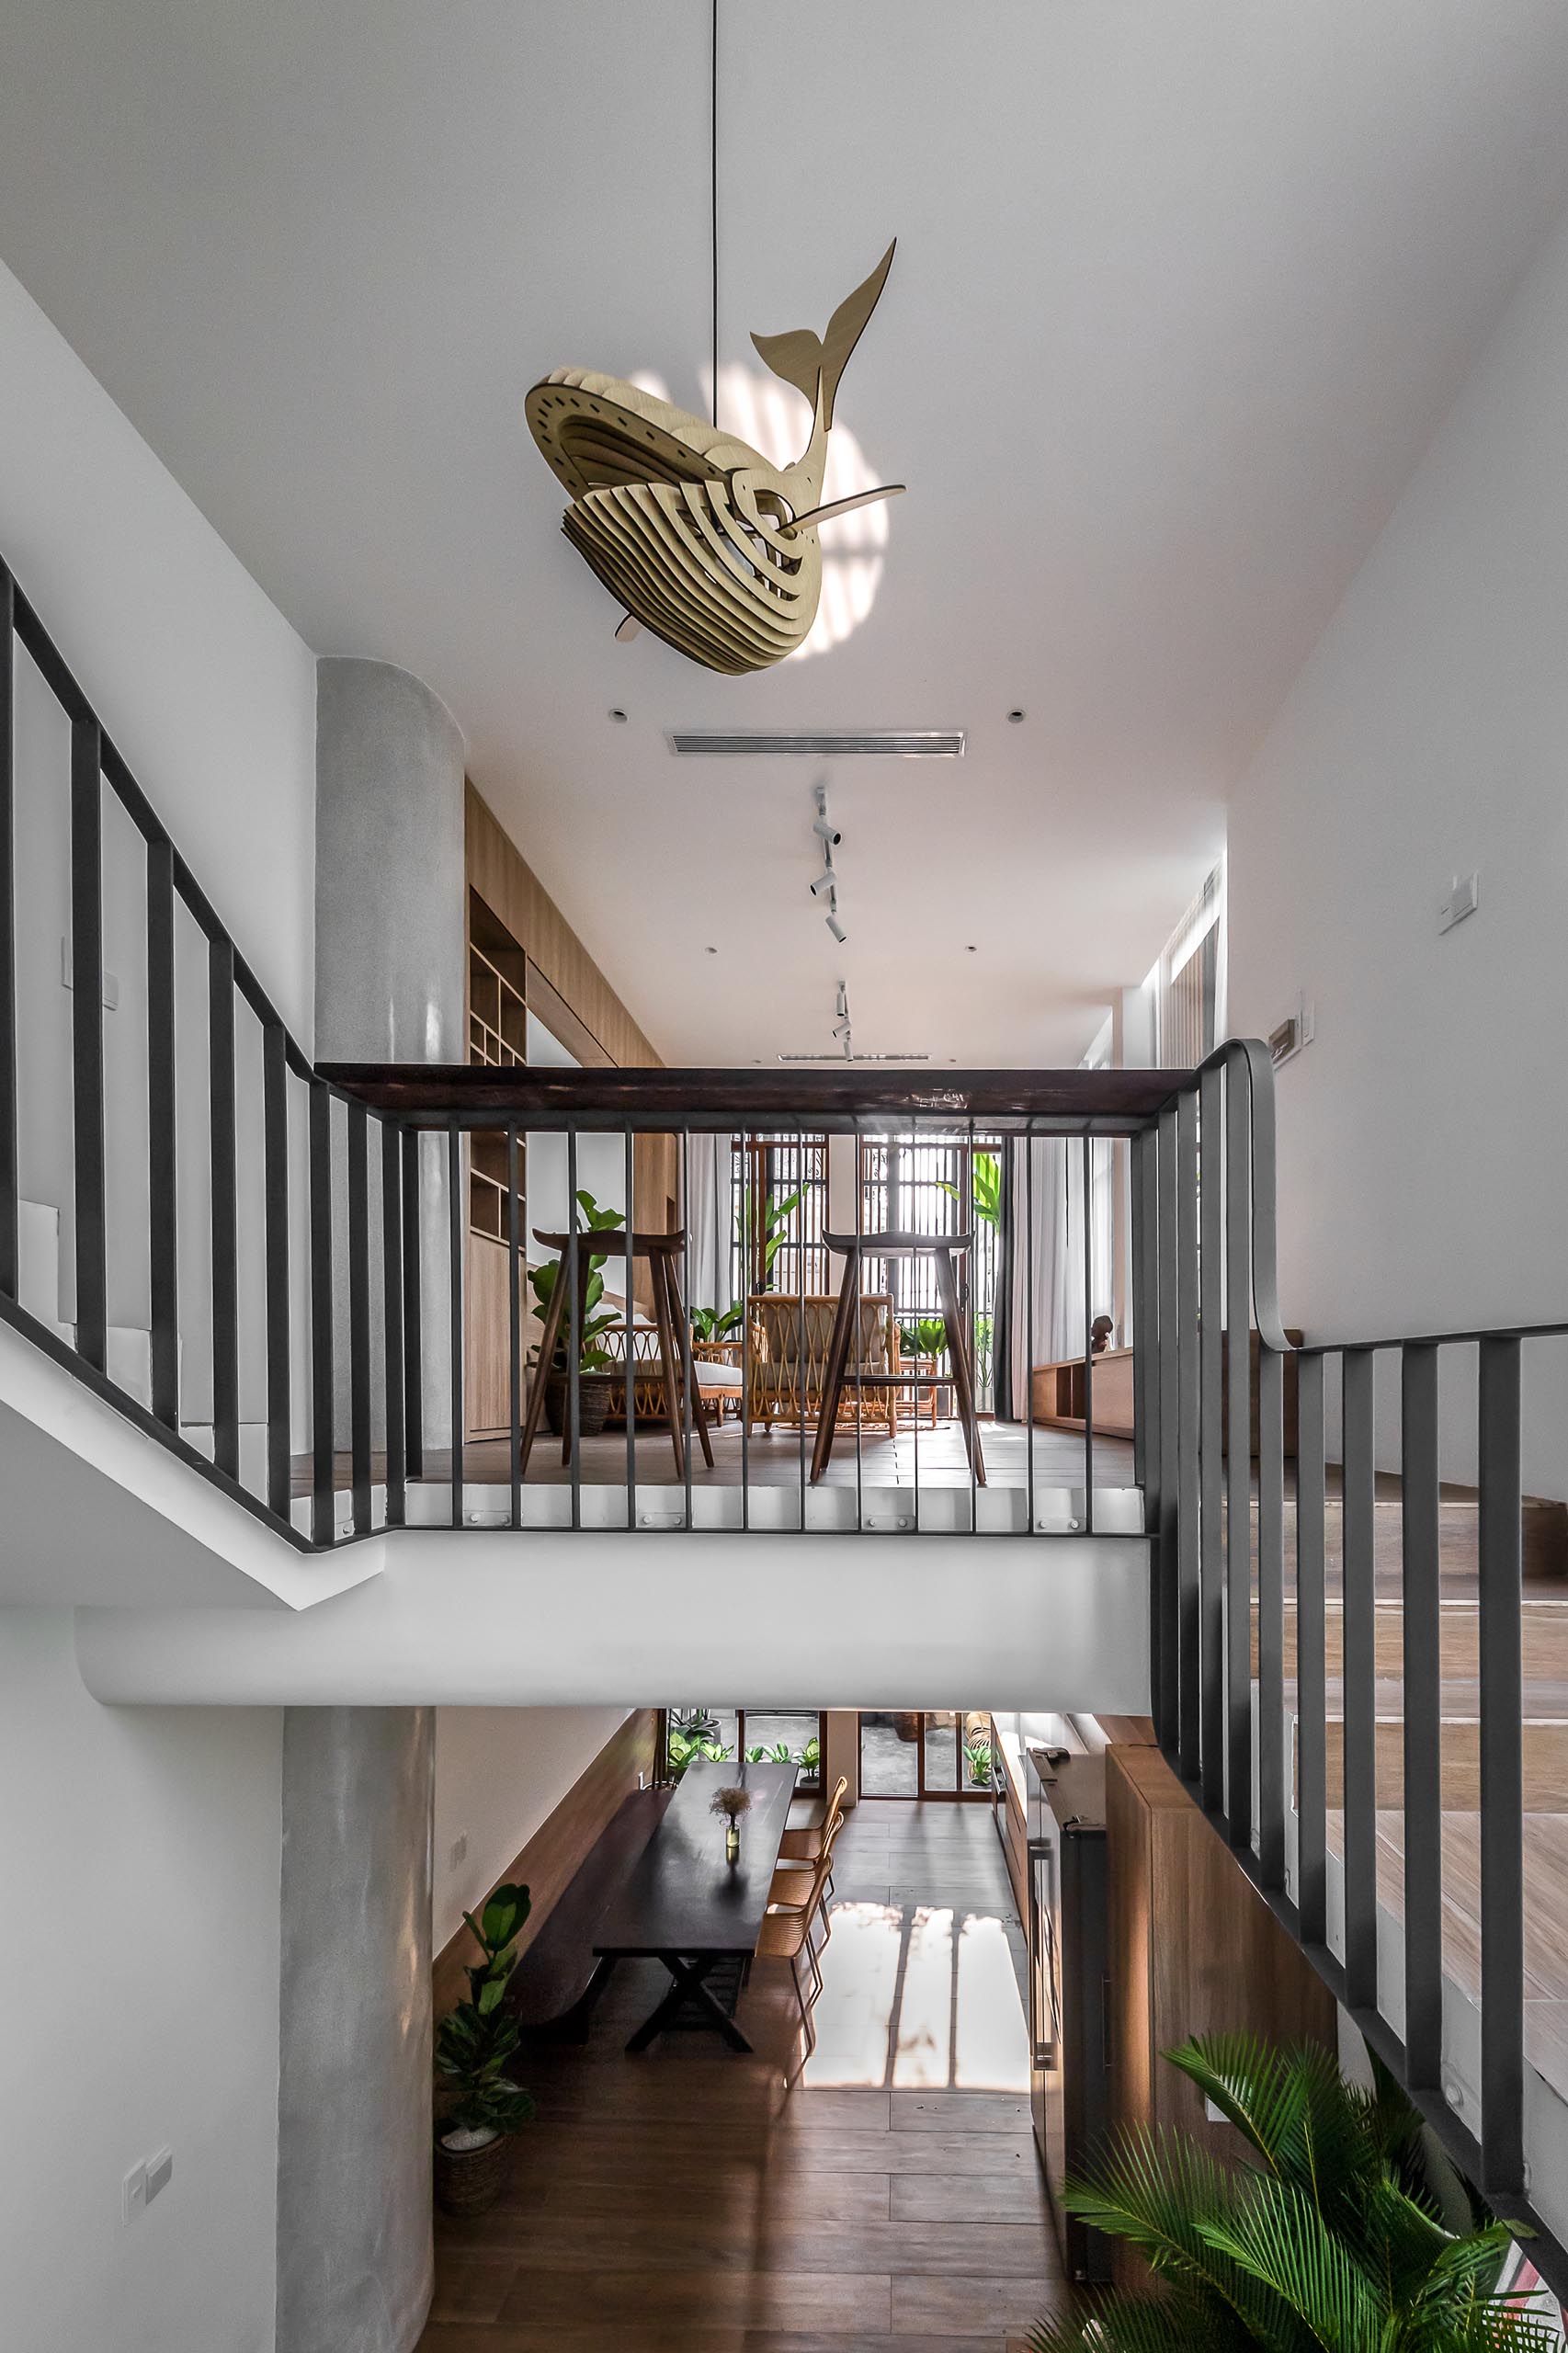 Before reaching the living room of this modern home, there's a small bar area built into the design of the black handrail. From this angle, you're able to see the wood wall sculpture light that hangs from the ceiling.